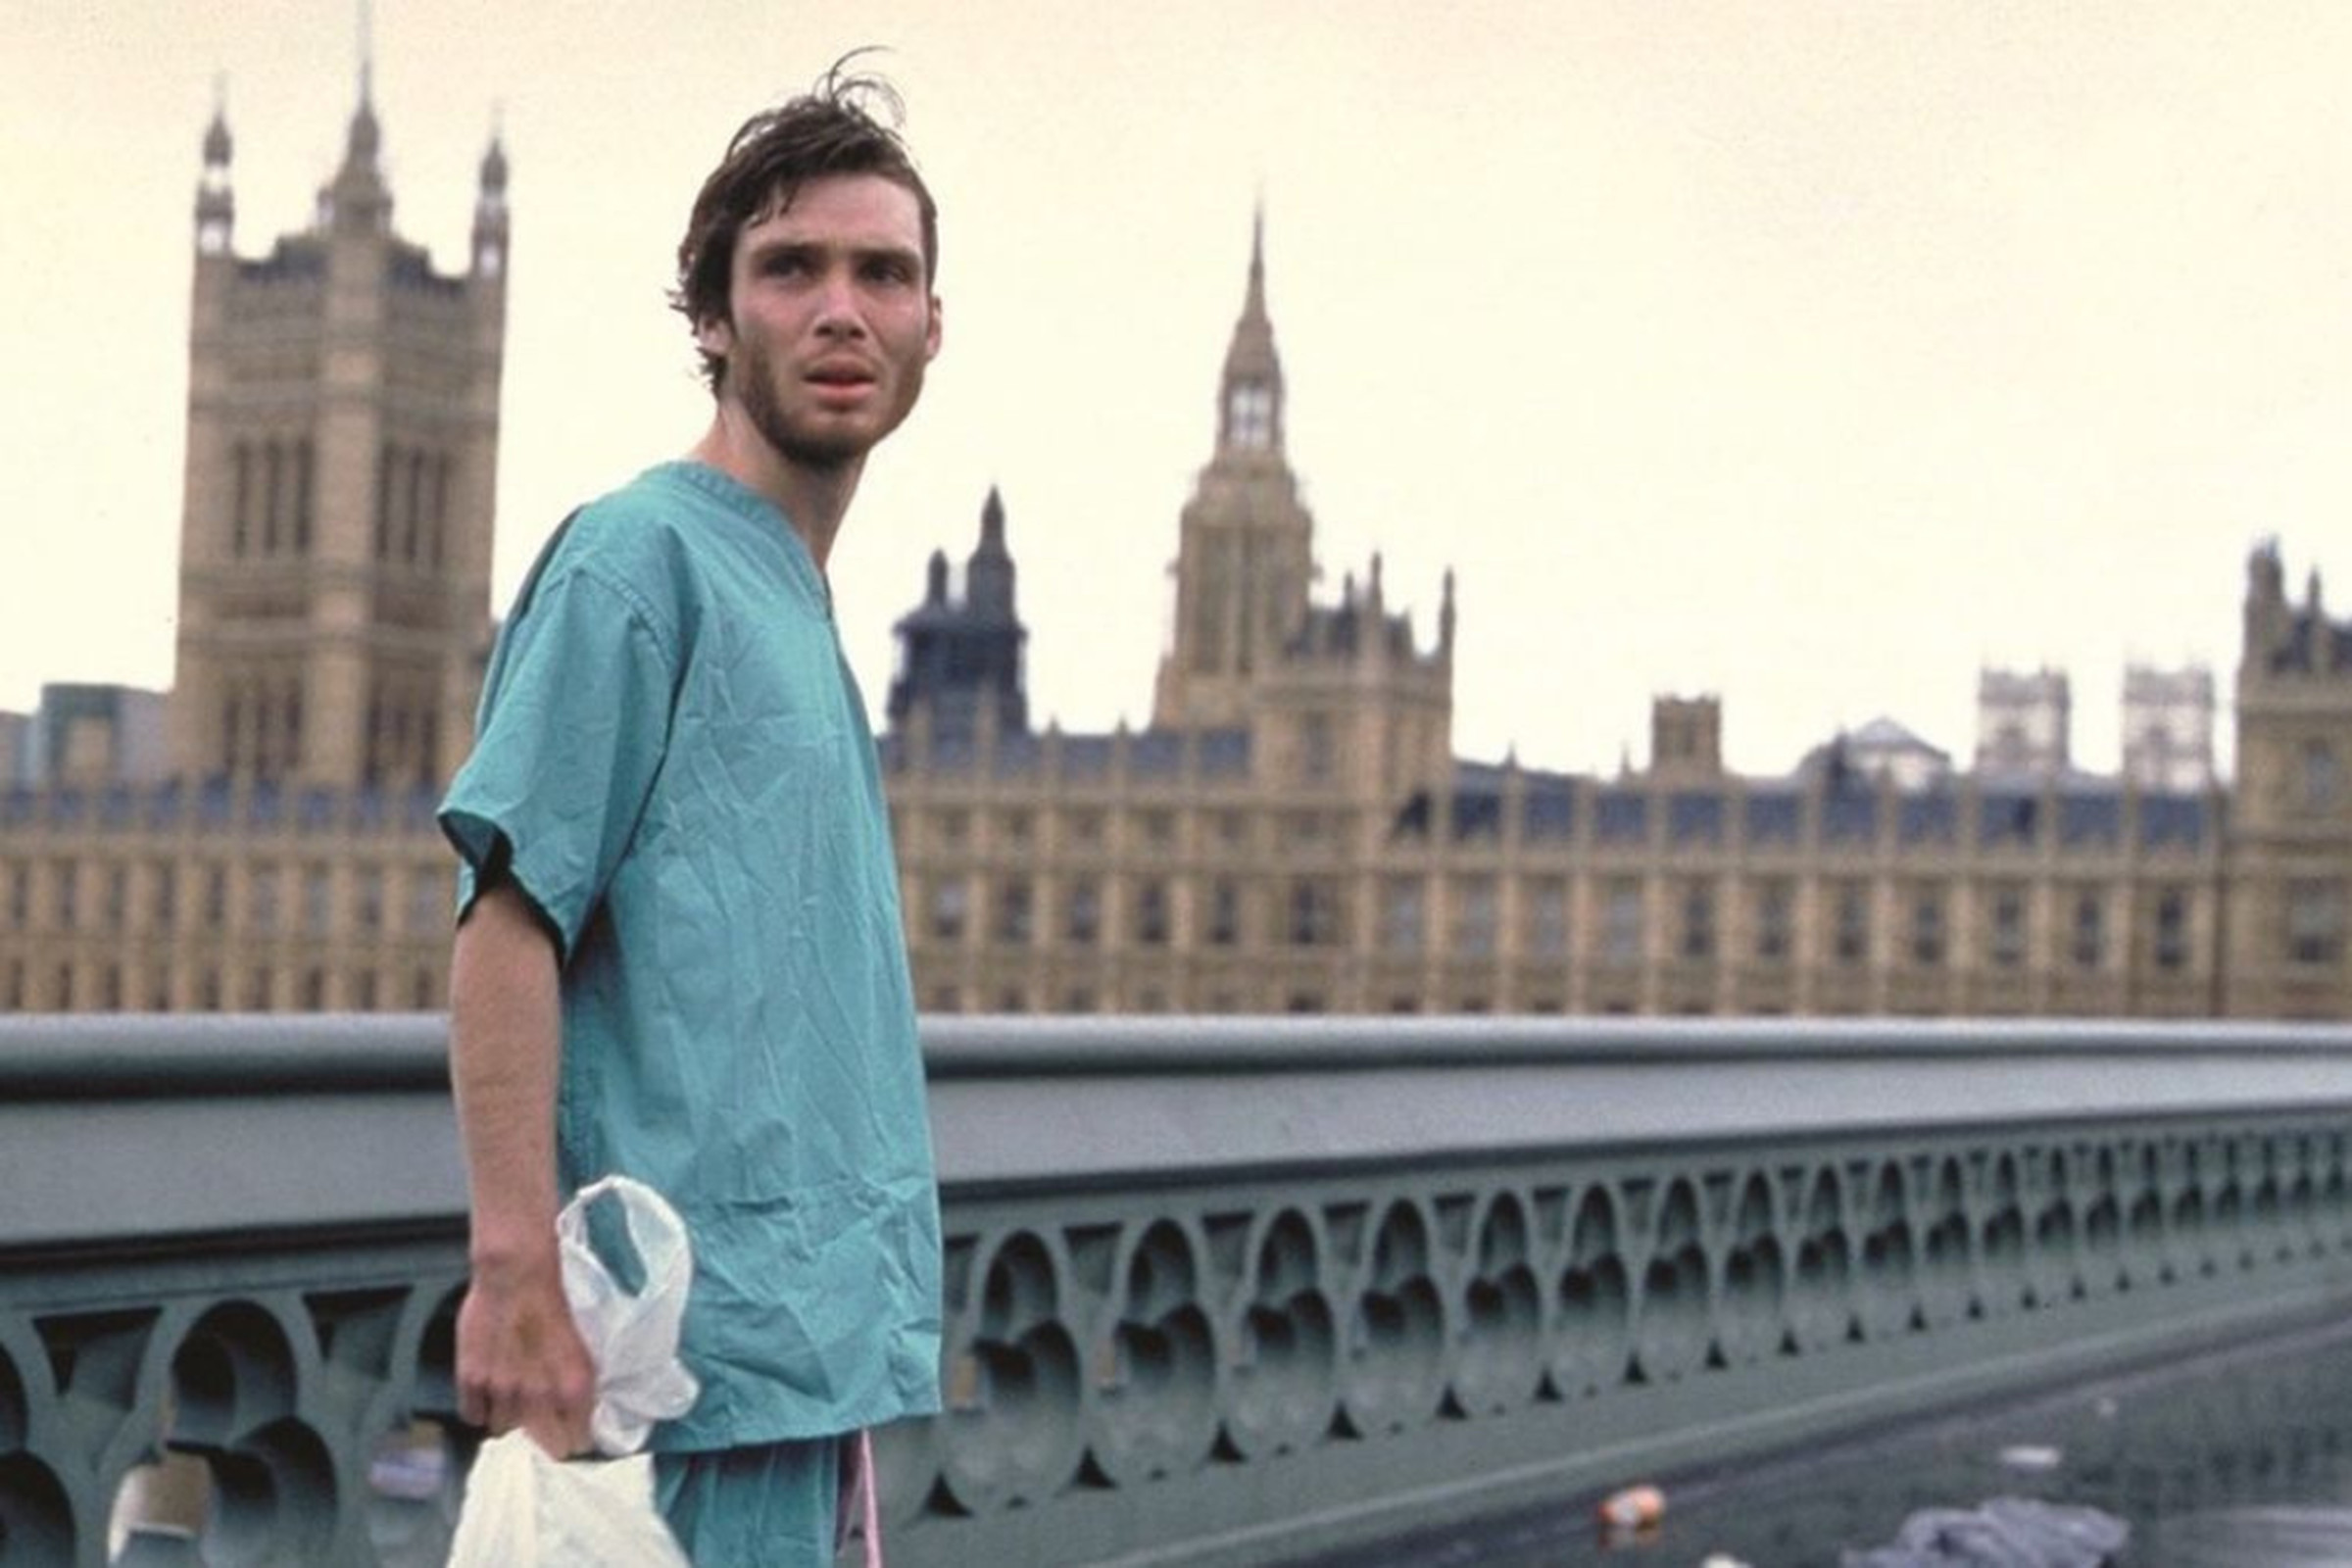 A man wearing hospital scrubs holding a plastic shopping back and looking out on a deserted London from the Westminster Bridge.